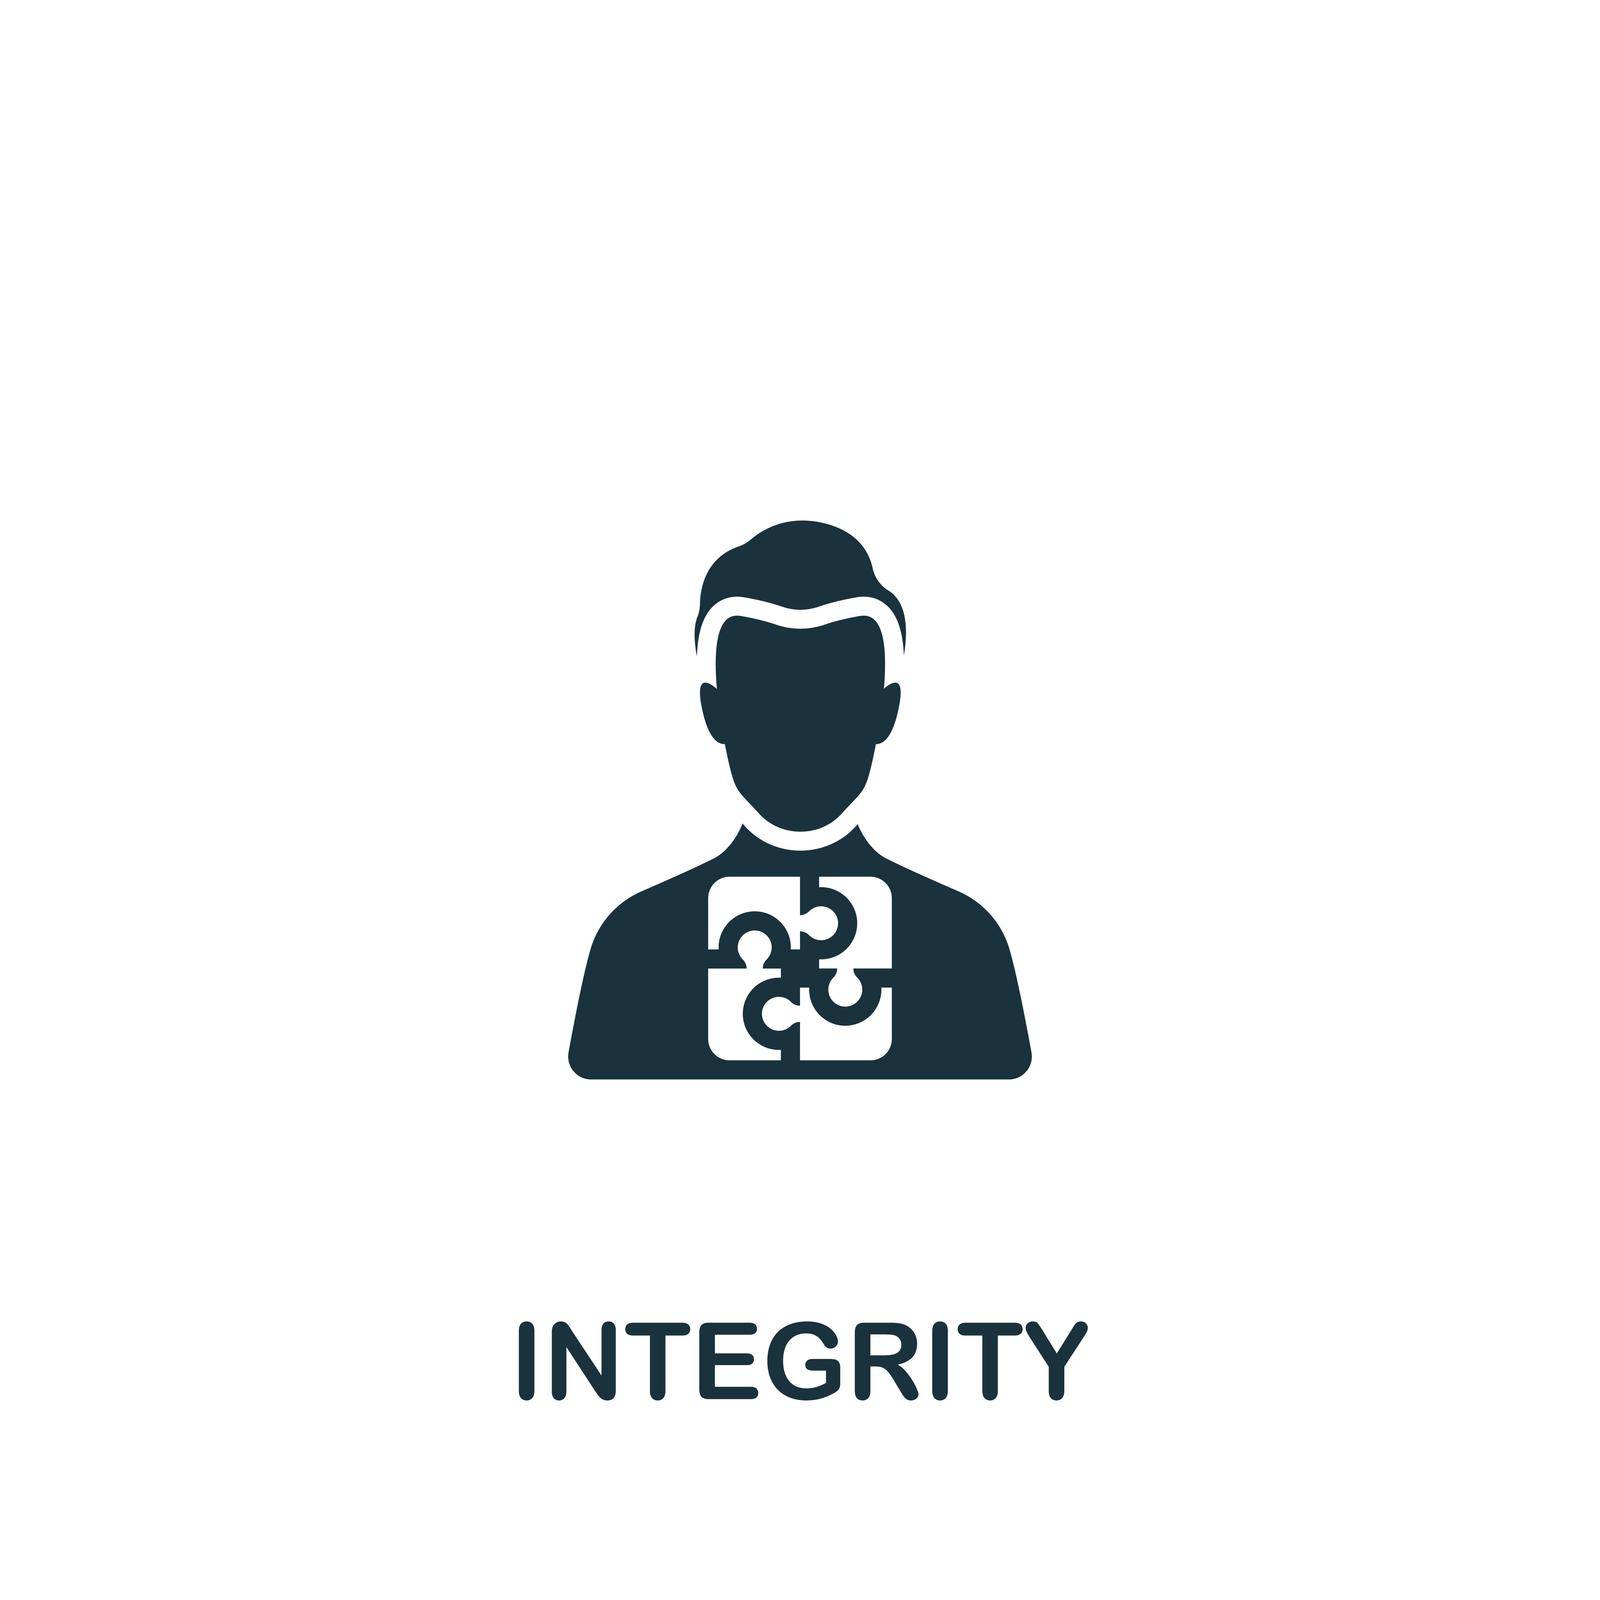 Integrity icon. Monochrome simple Personality icon for templates, web design and infographics by simakovavector